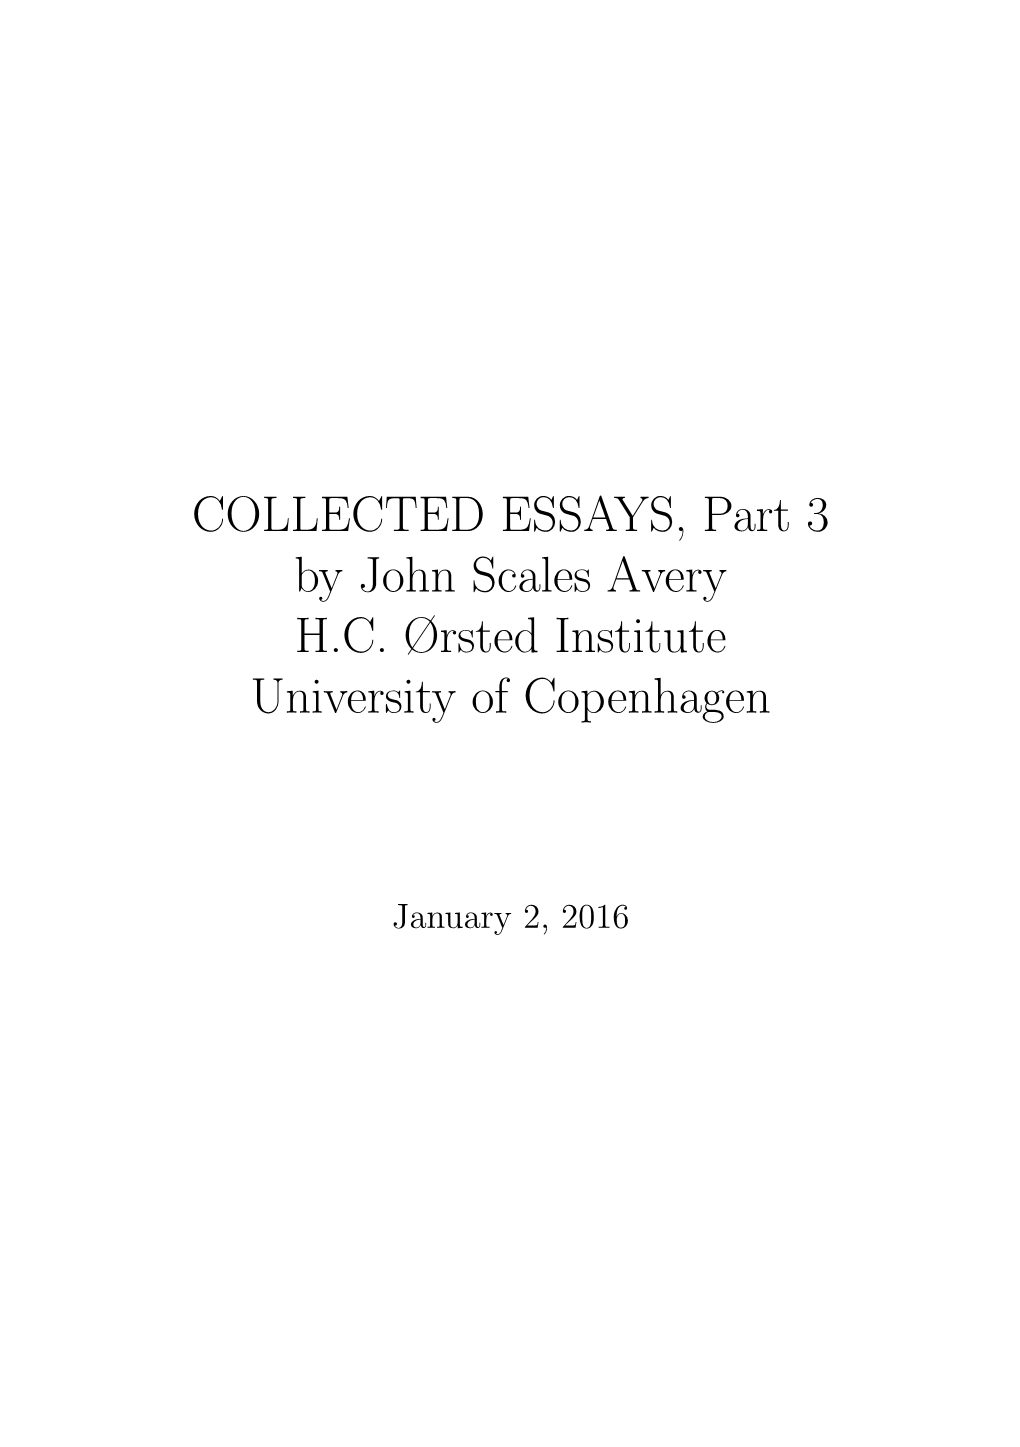 COLLECTED ESSAYS, Part 3 by John Scales Avery H.C. Ørsted Institute University of Copenhagen